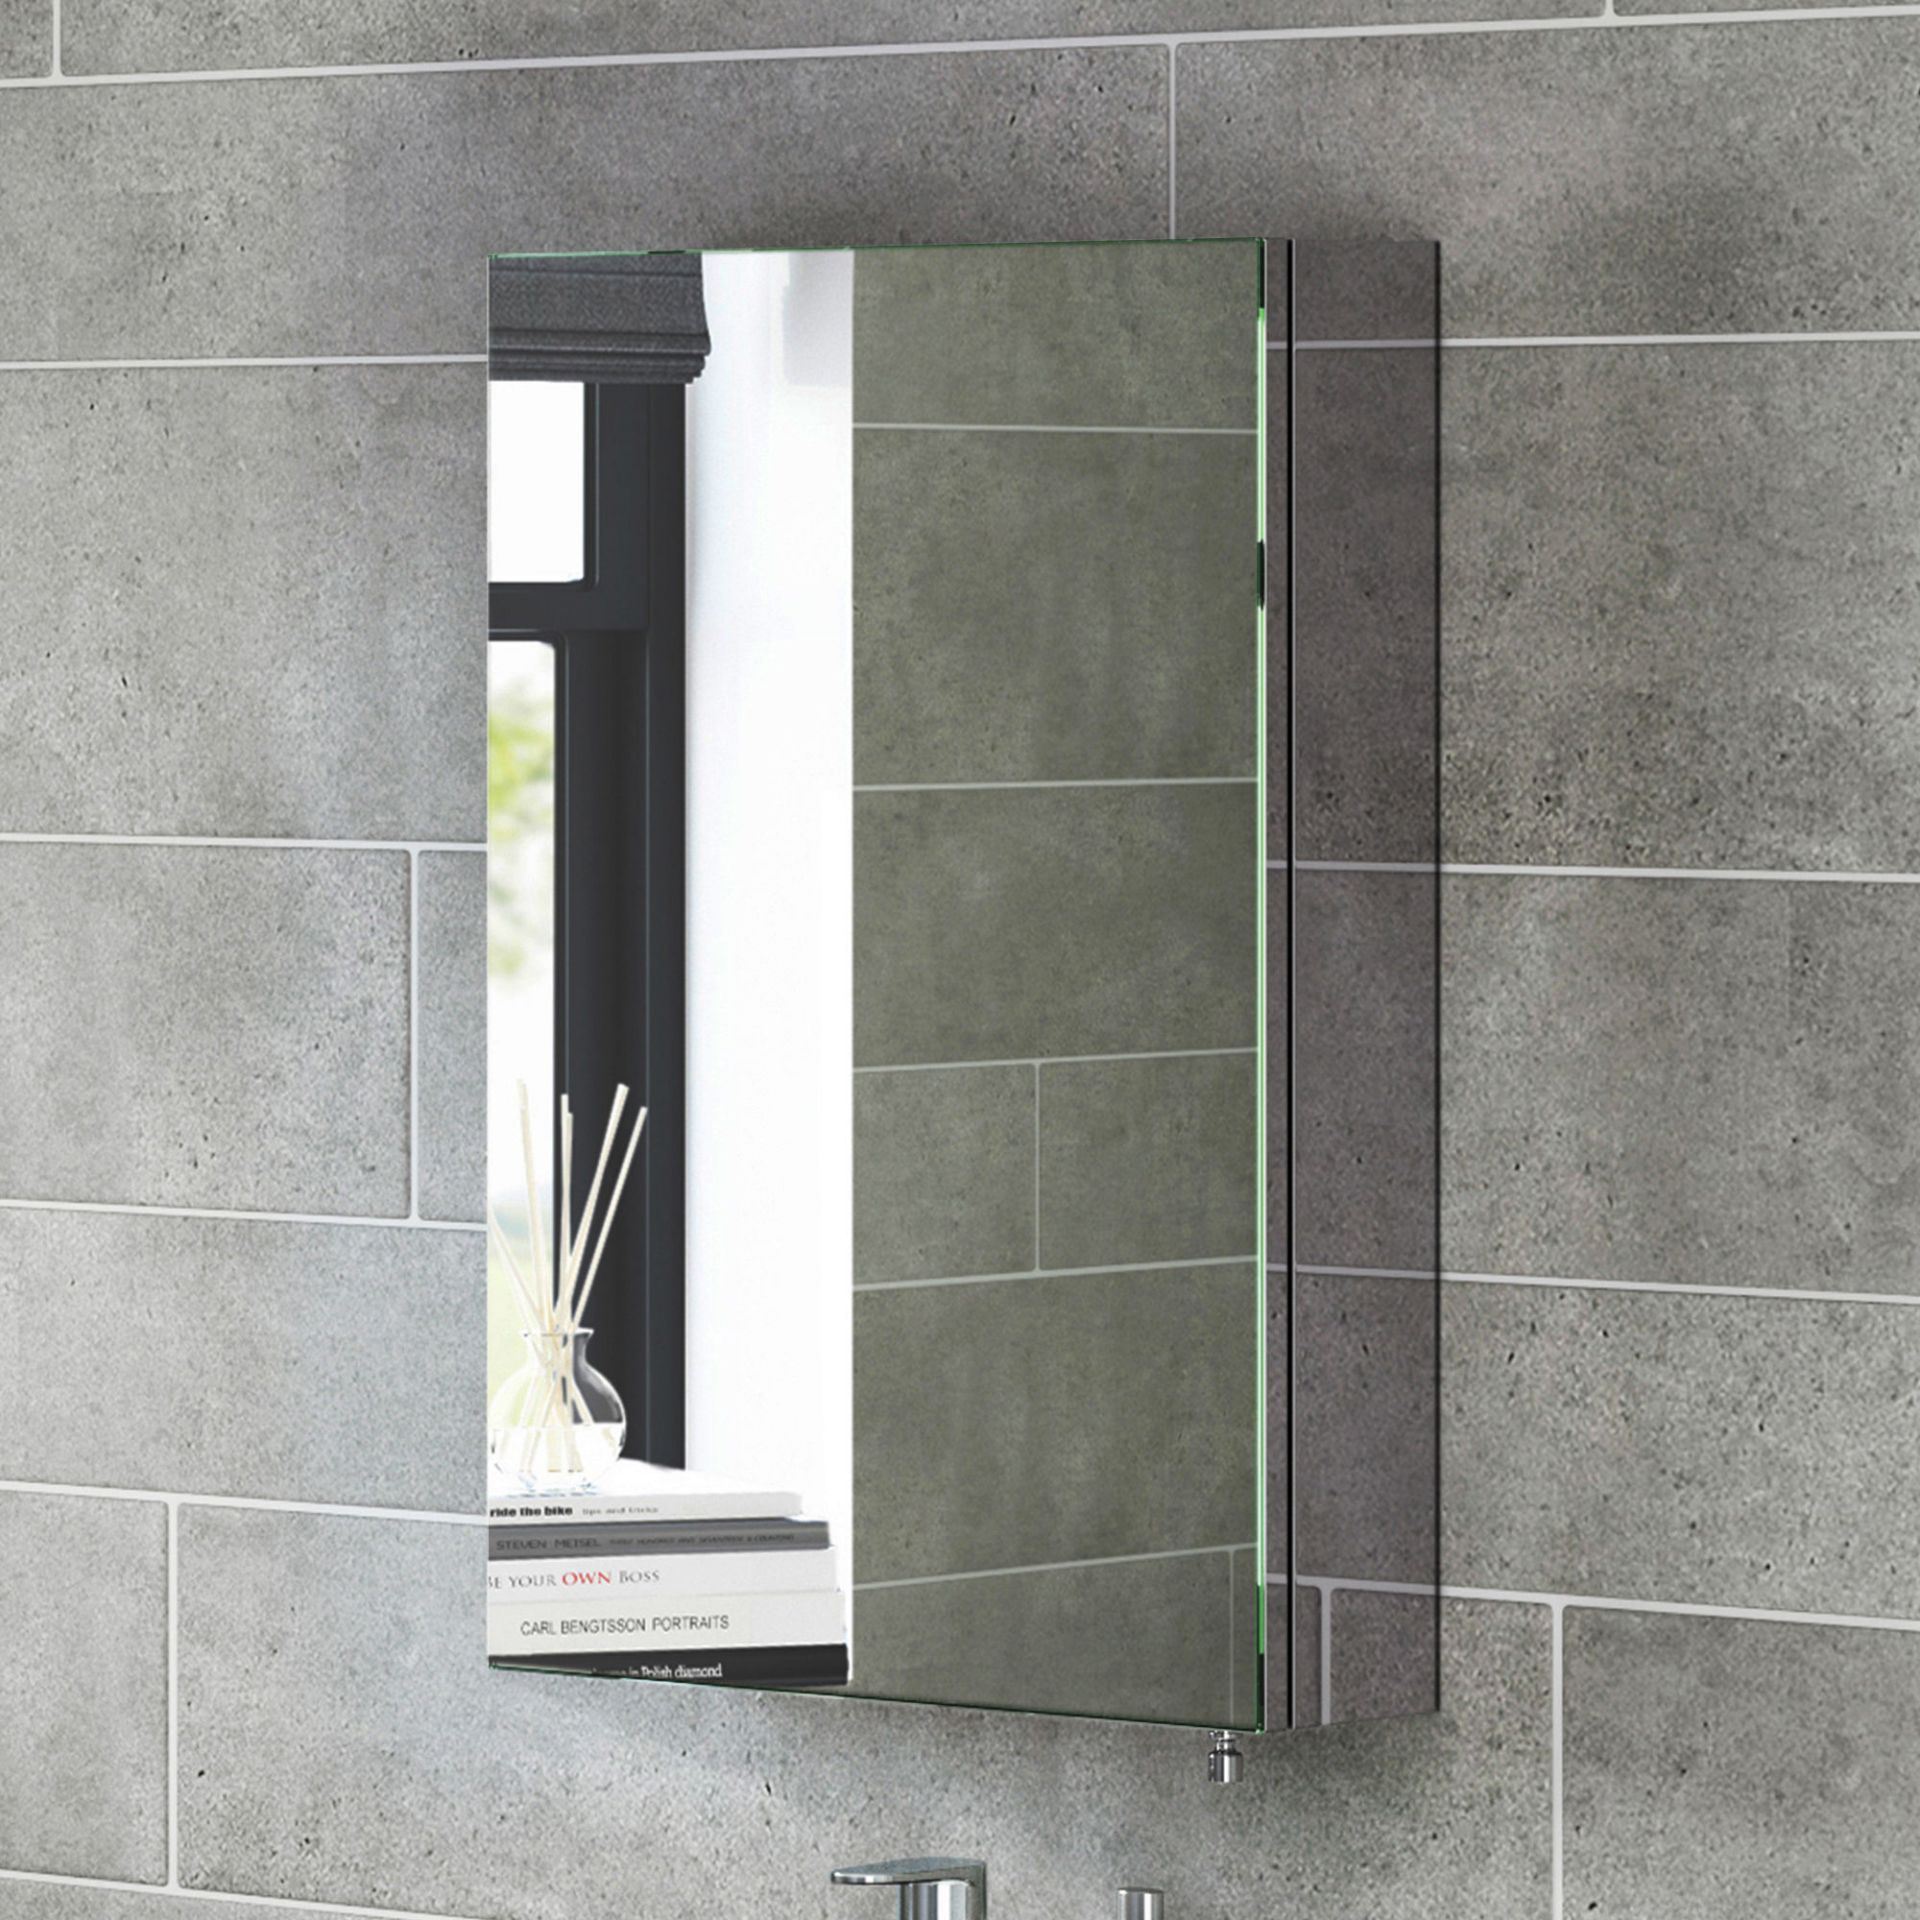 (YC25) 400x600mm Liberty Stainless Steel Single Door Mirror Cabinet. RRP £199.99. Made from high-